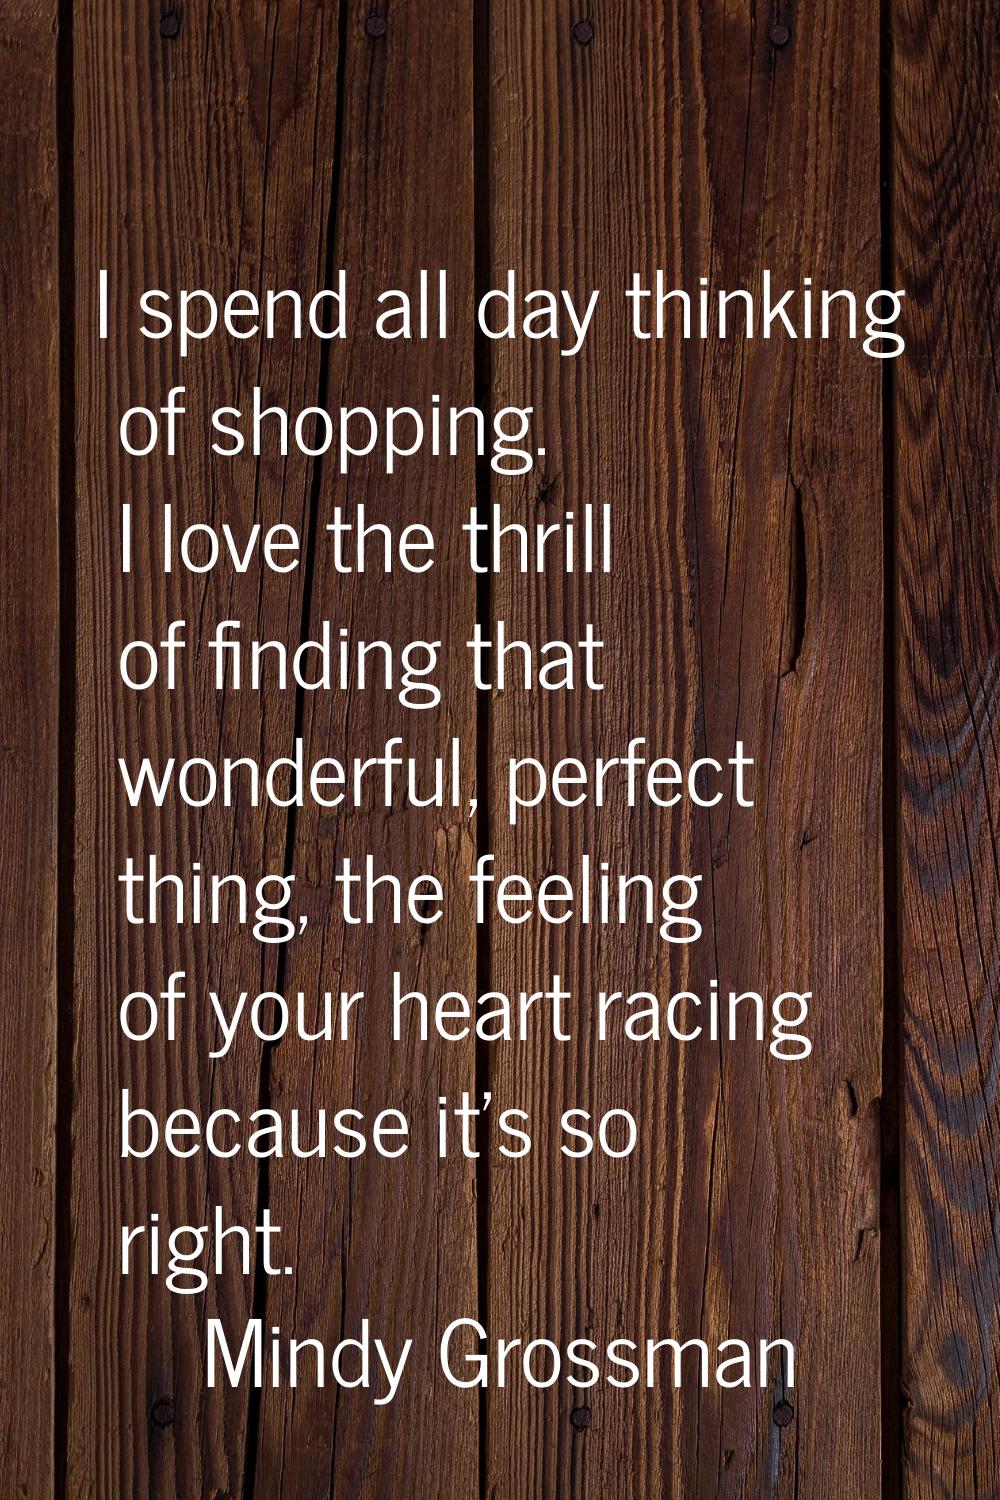 I spend all day thinking of shopping. I love the thrill of finding that wonderful, perfect thing, t